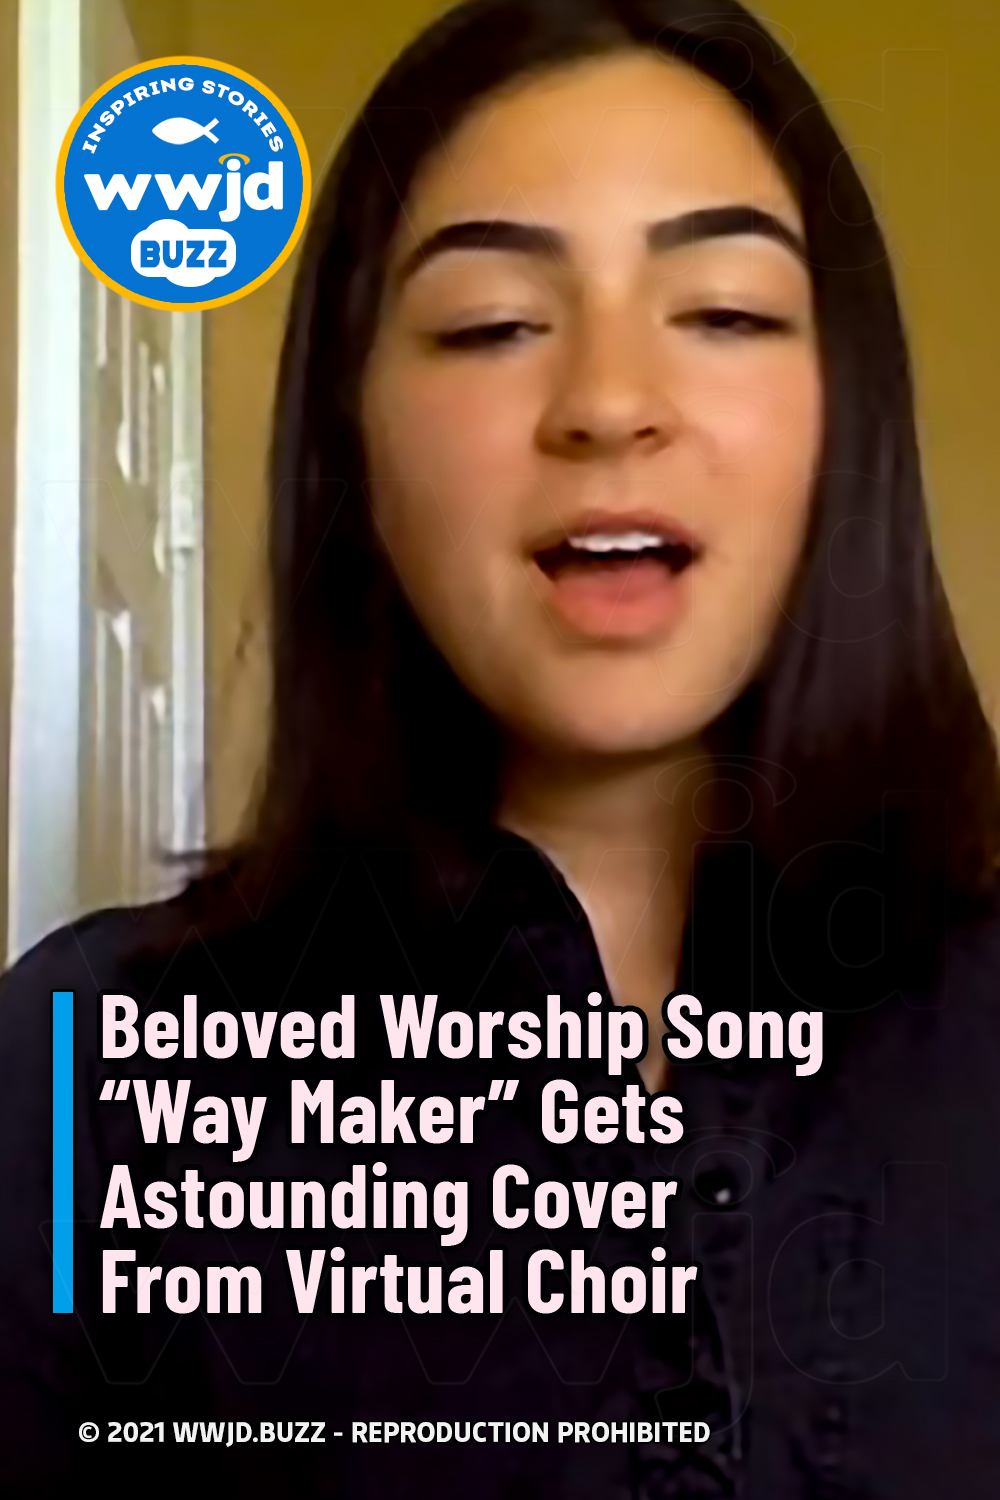 Beloved Worship Song “Way Maker” Gets Astounding Cover From Virtual Choir